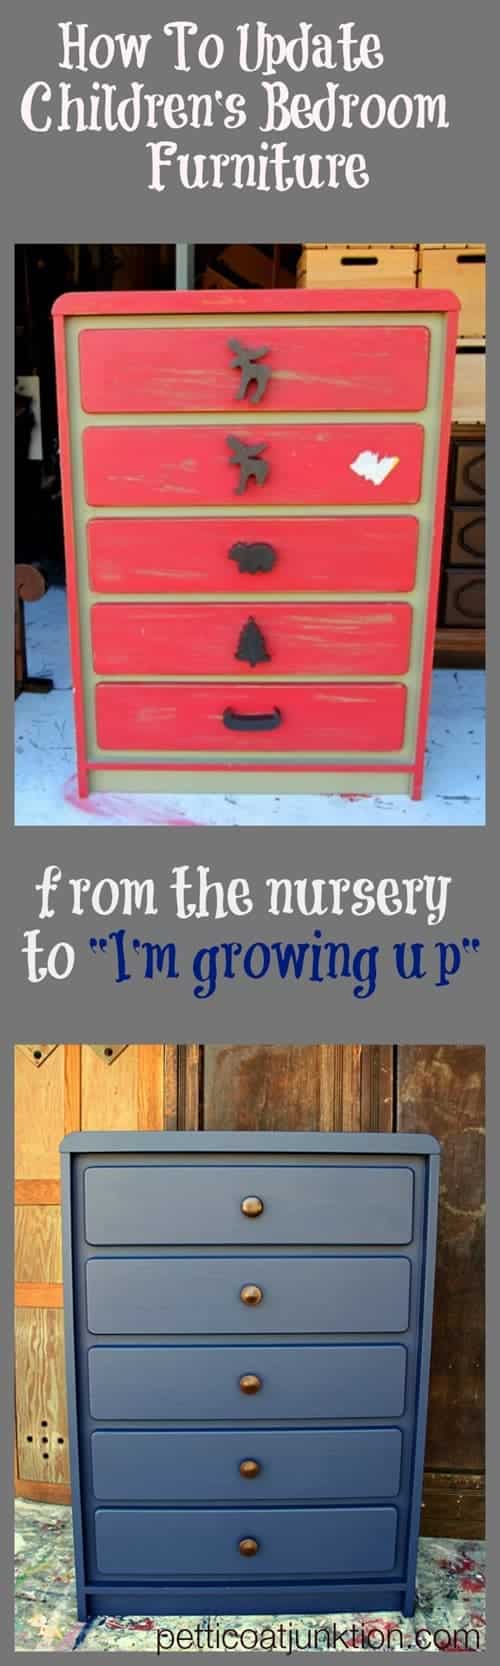 children's furniture from the nursery to growing boy Petticoat Junktion